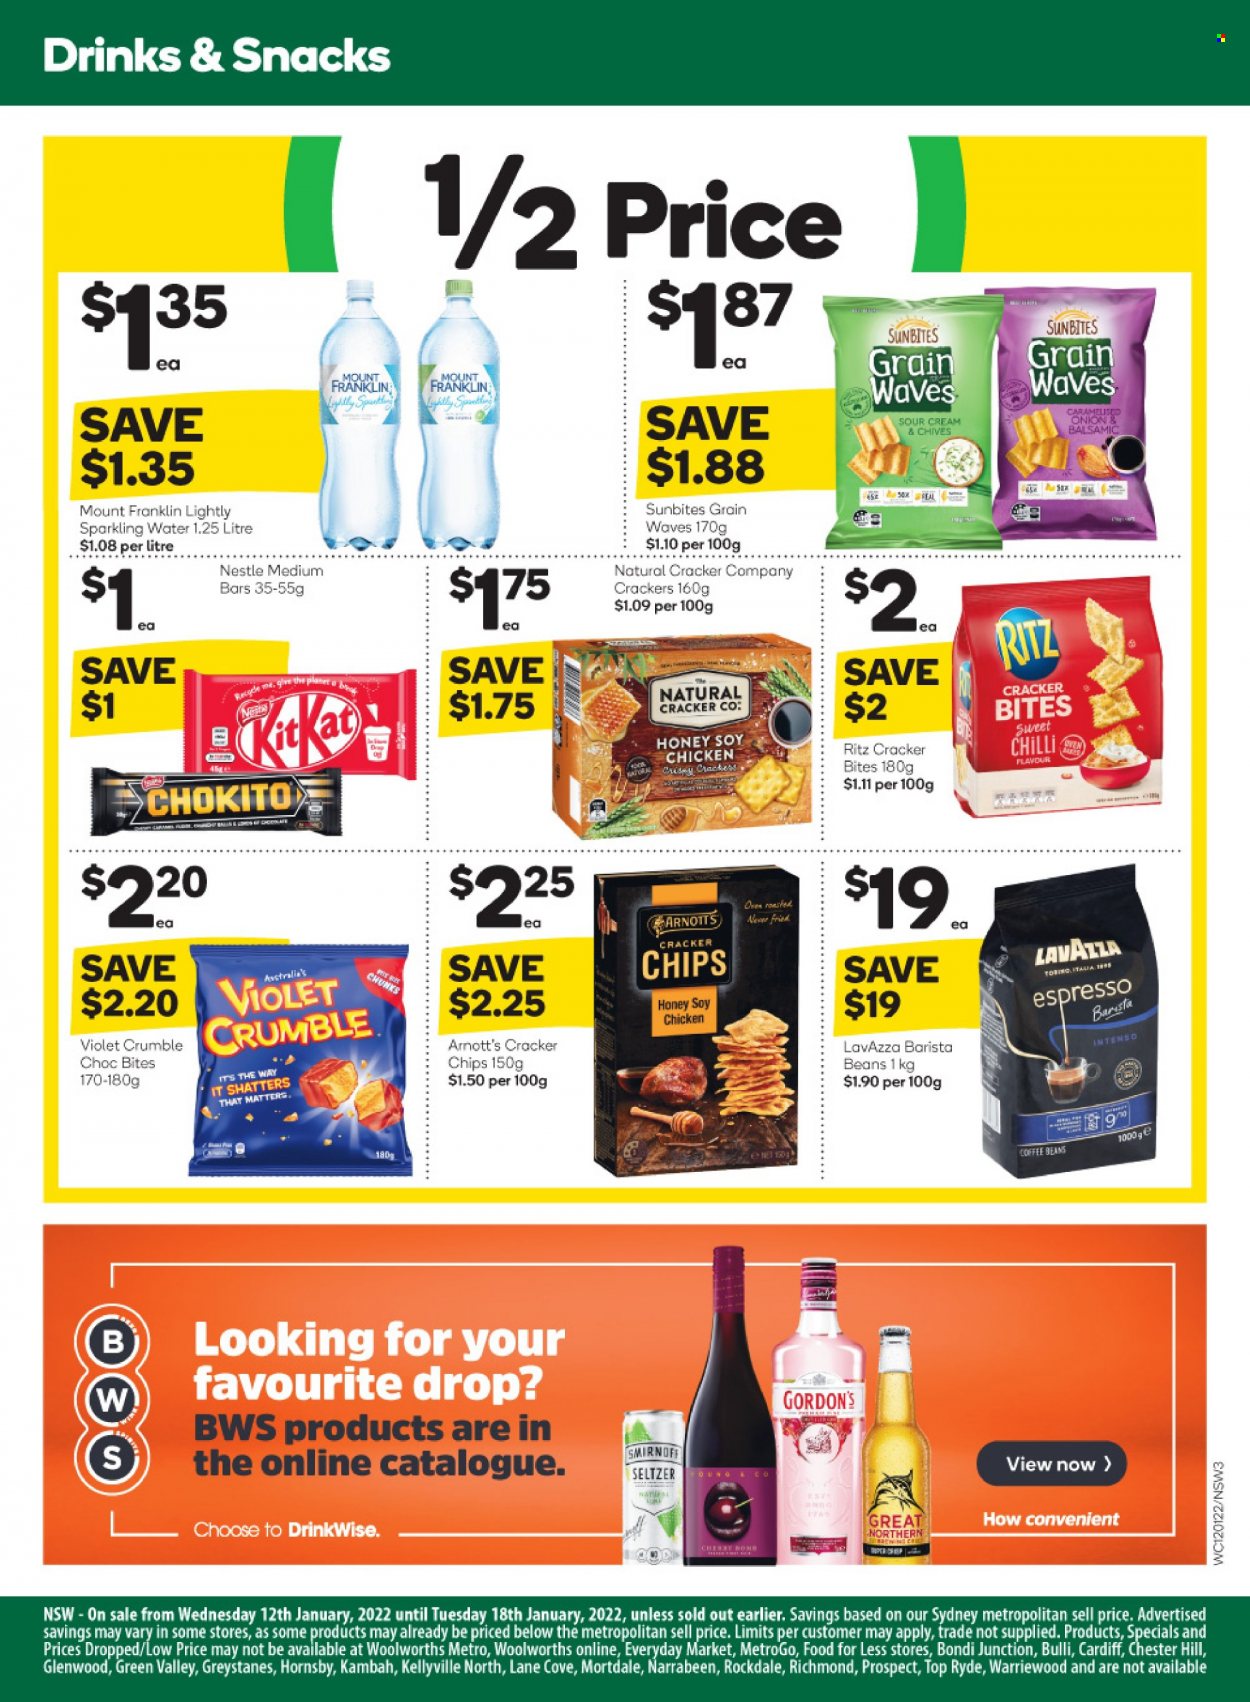 thumbnail - Woolworths Catalogue - 12 Jan 2022 - 18 Jan 2022 - Sales products - chives, Nestlé, crackers, RITZ, chips, Sunbites, honey, seltzer water, sparkling water, coffee beans, Intenso, Lavazza, Smirnoff, Gordon's. Page 3.